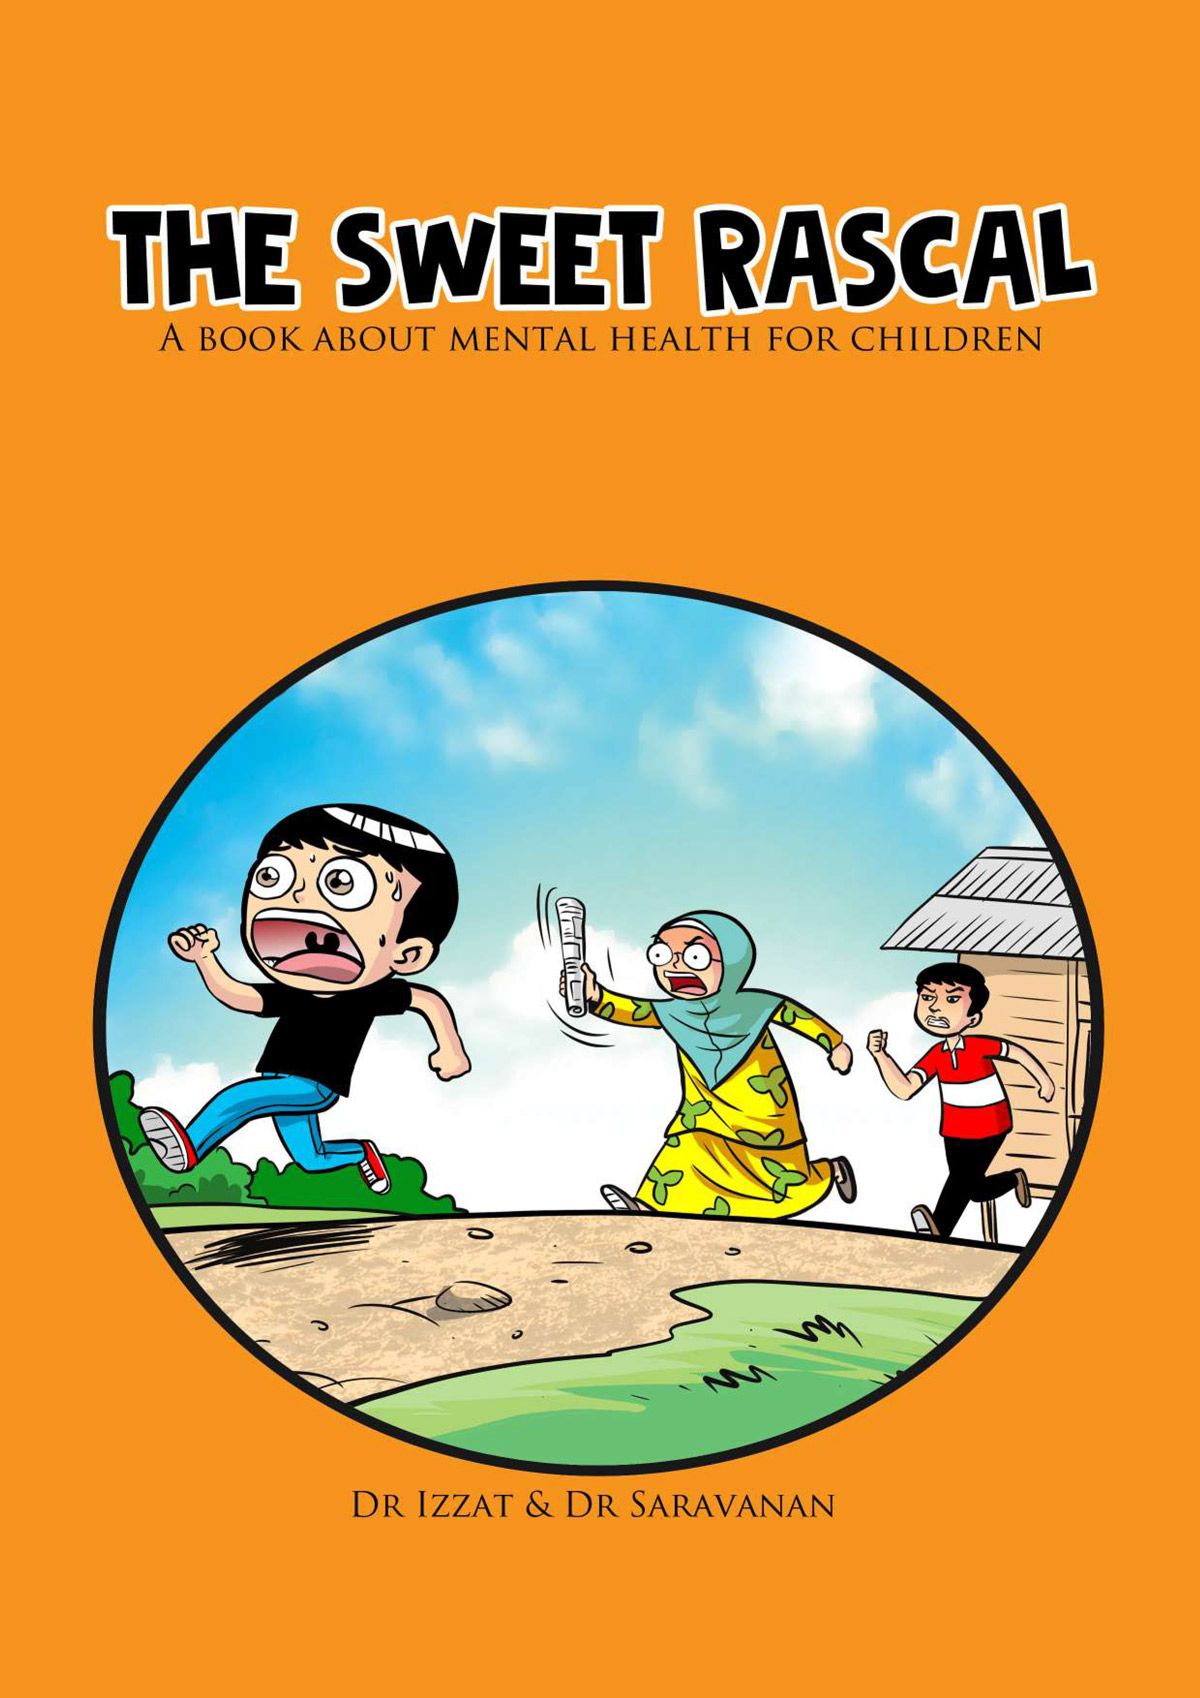 The Sweet Rascal - A Book About Mental health for Children